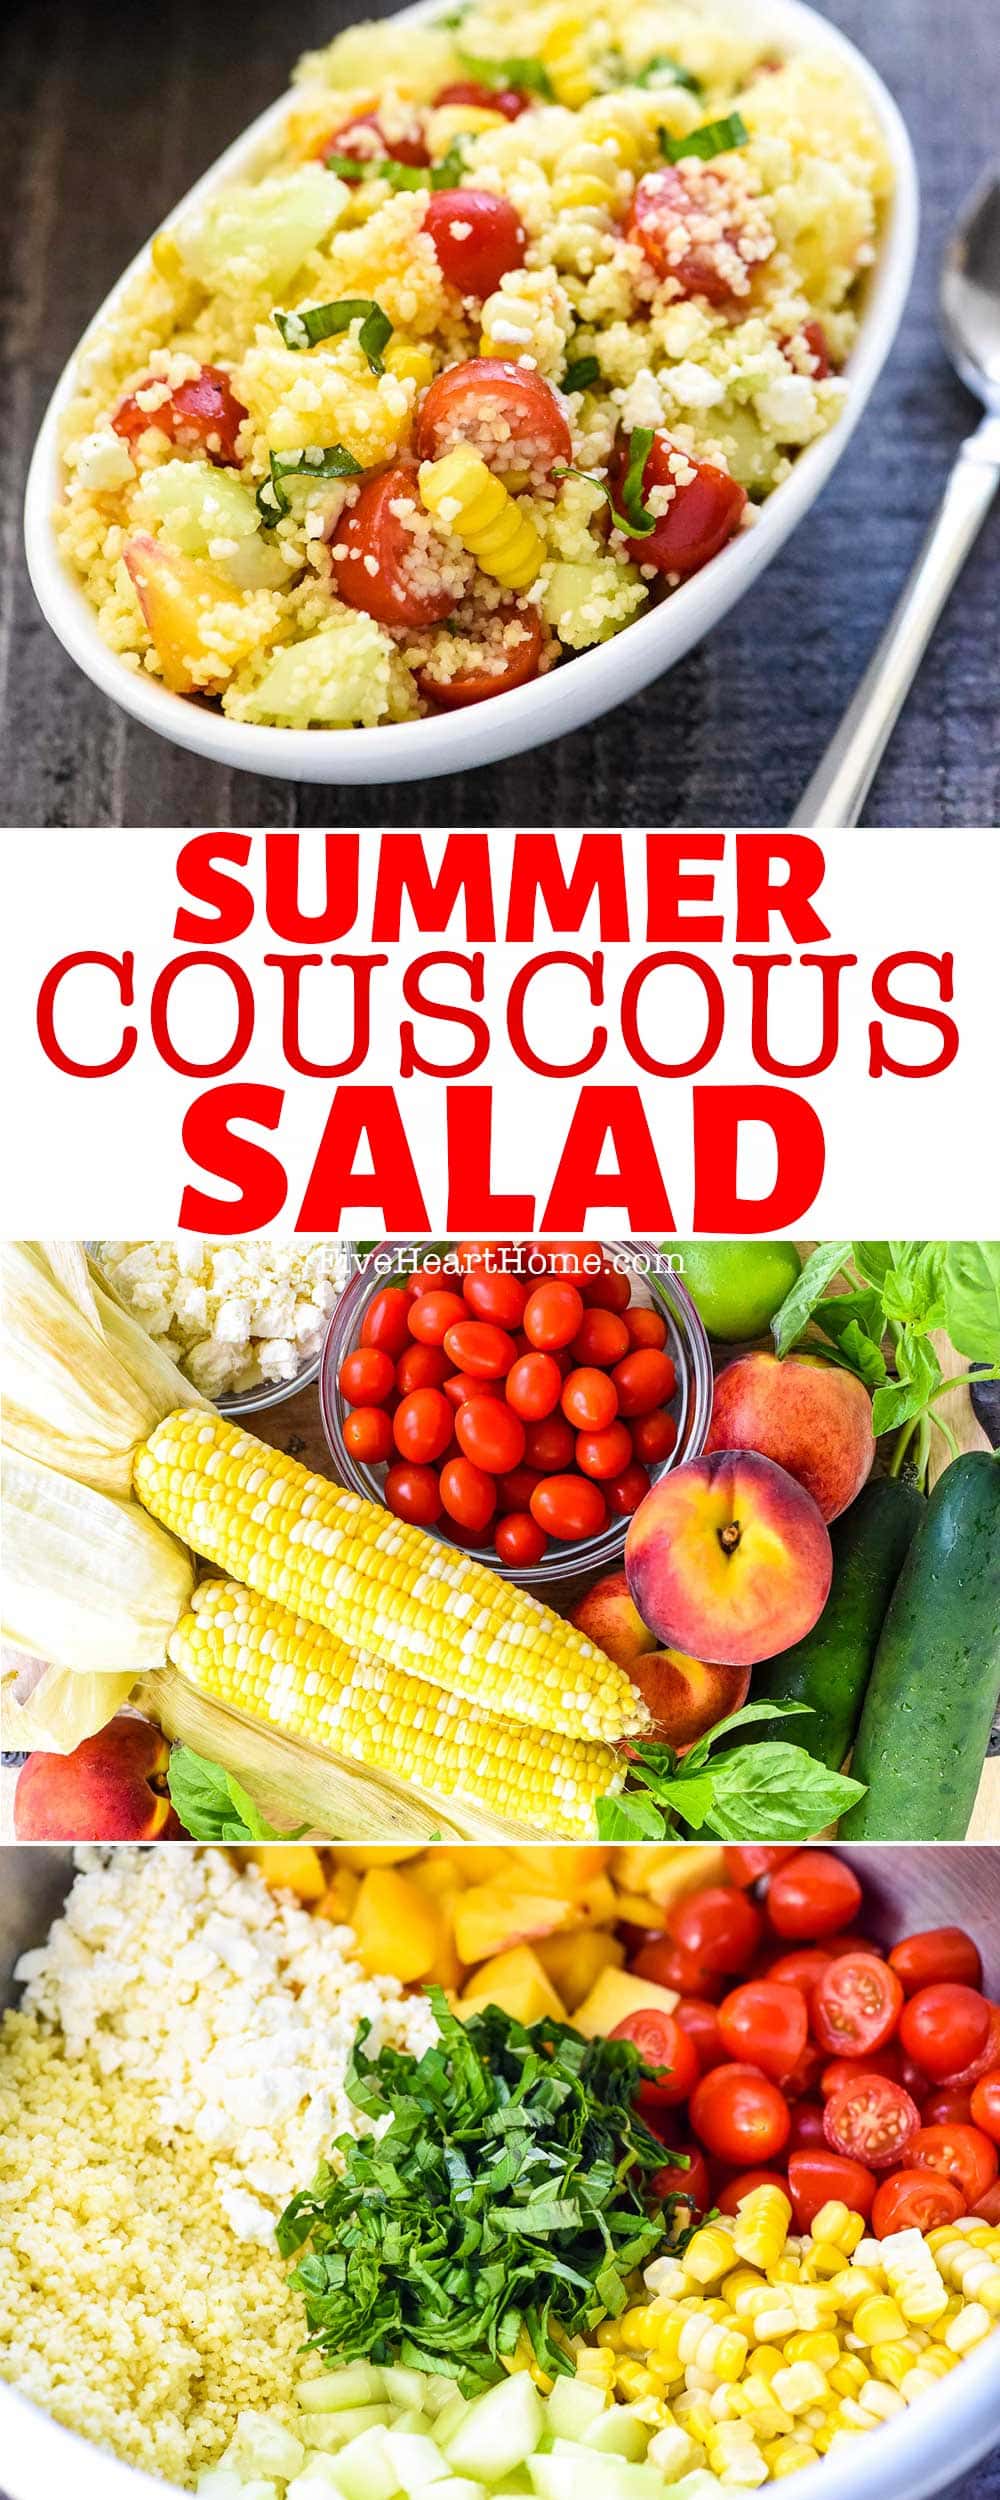 Couscous Salad ~ this flavorful summer side dish features fluffy couscous studded with fresh corn, juicy tomatoes, crisp cucumbers, sweet peaches, chopped basil, and creamy feta in an amazing honey lime dressing! | FiveHeartHome.com via @fivehearthome